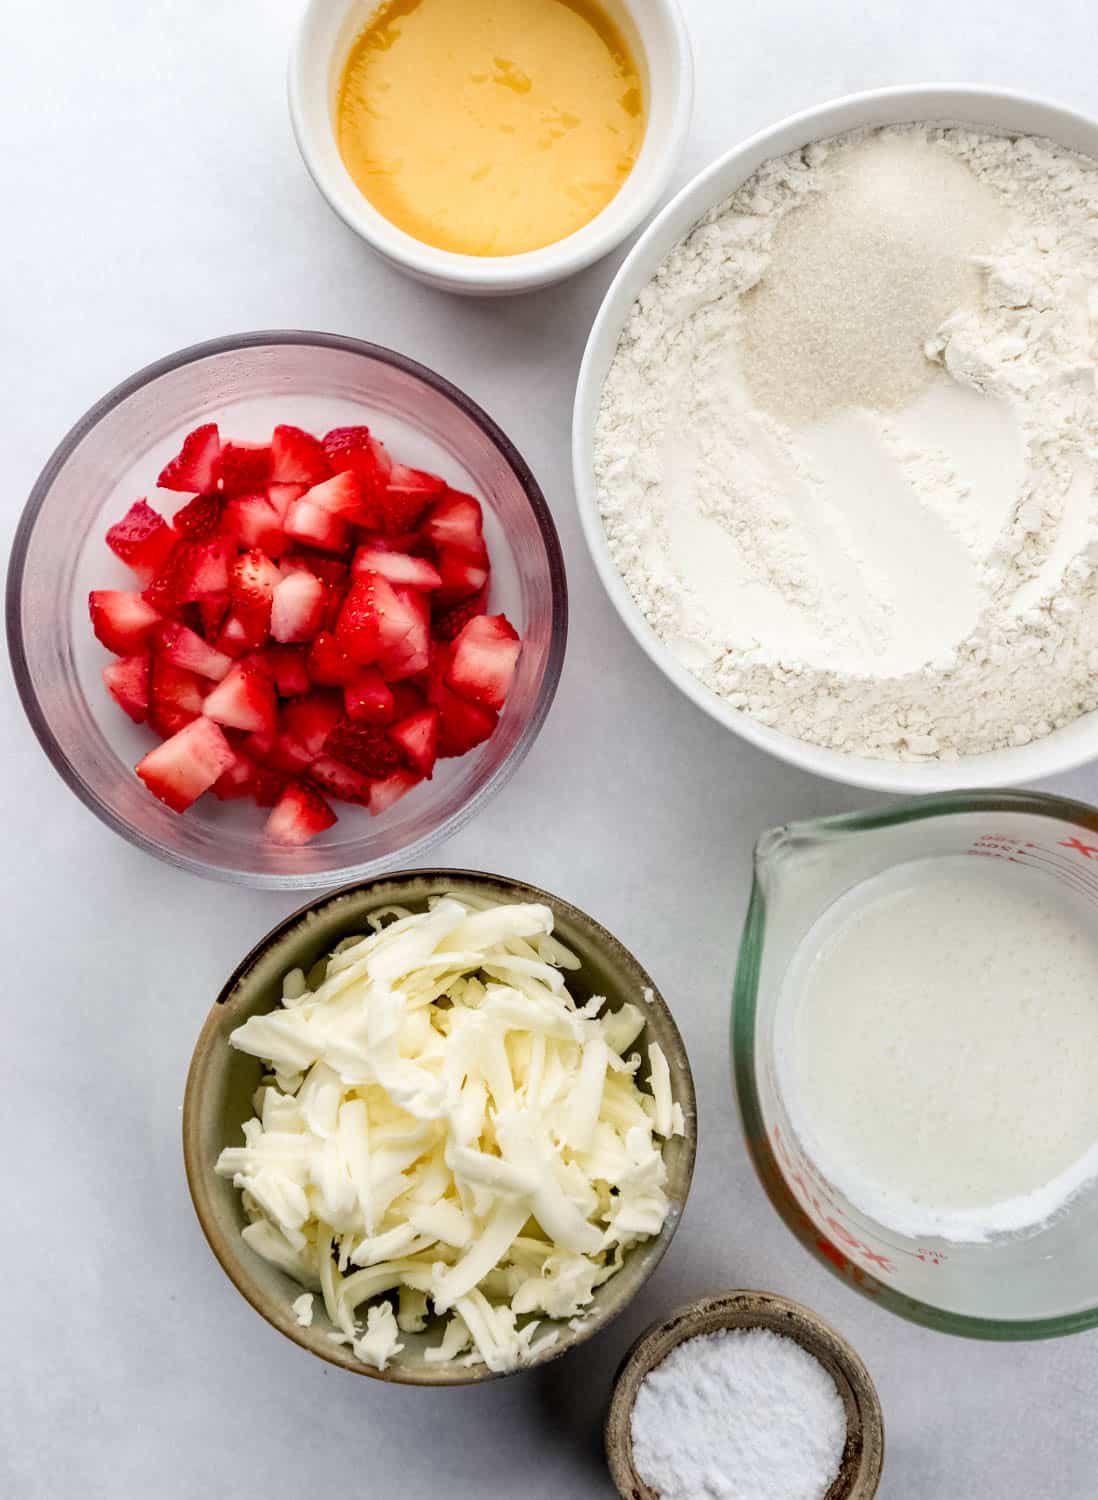 Overhead view of ingredients needed to make biscuits in separate bowls on white surface. 